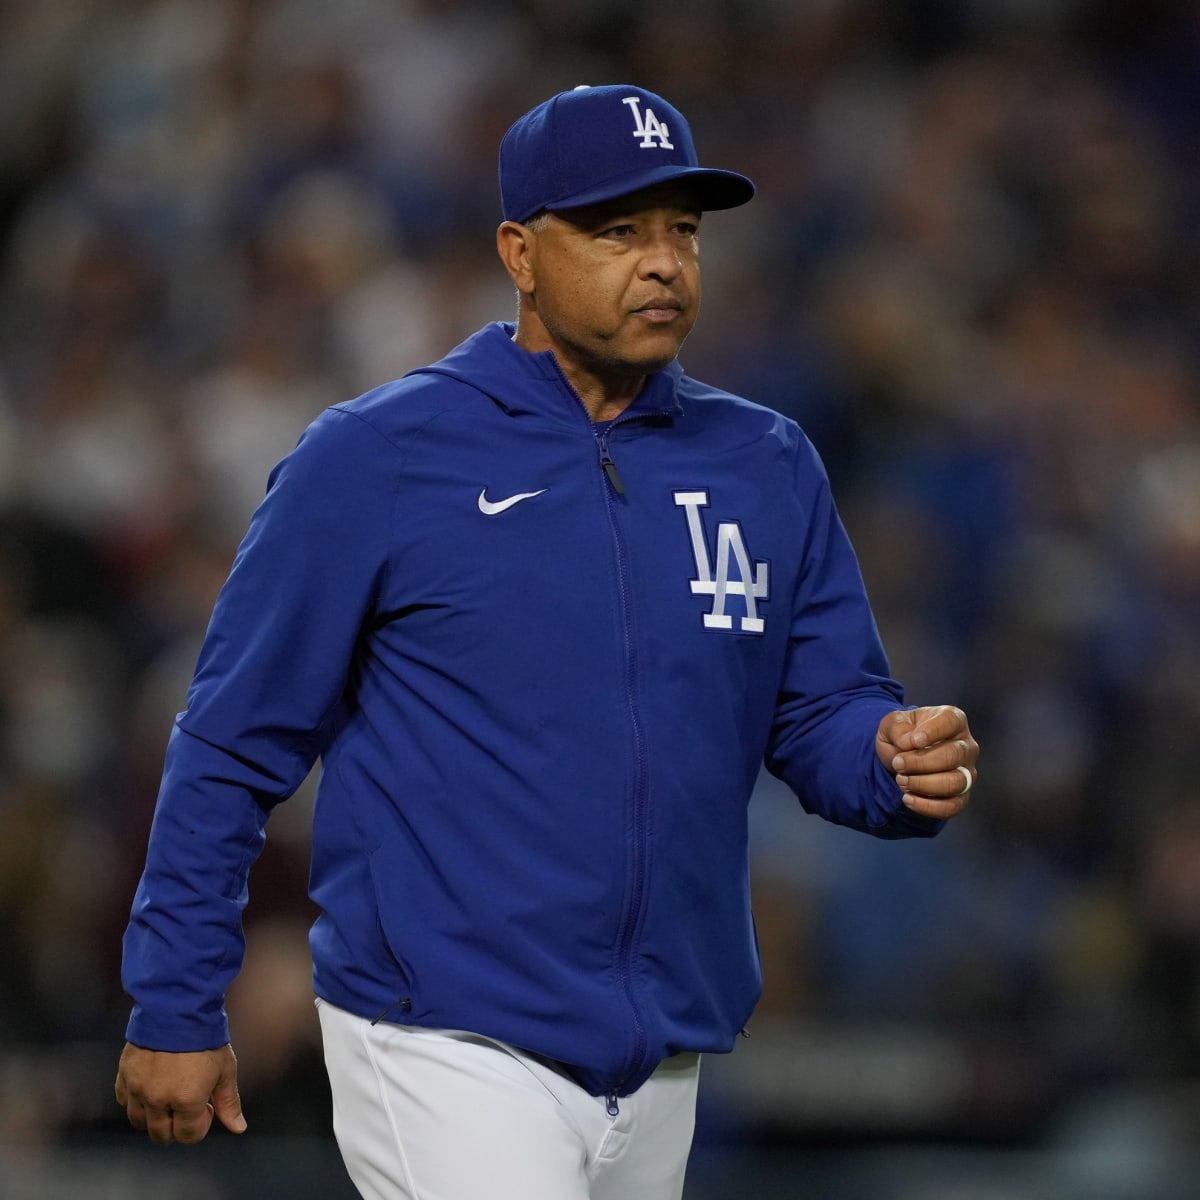 Manager of the Year Dave Roberts applied every day of his own